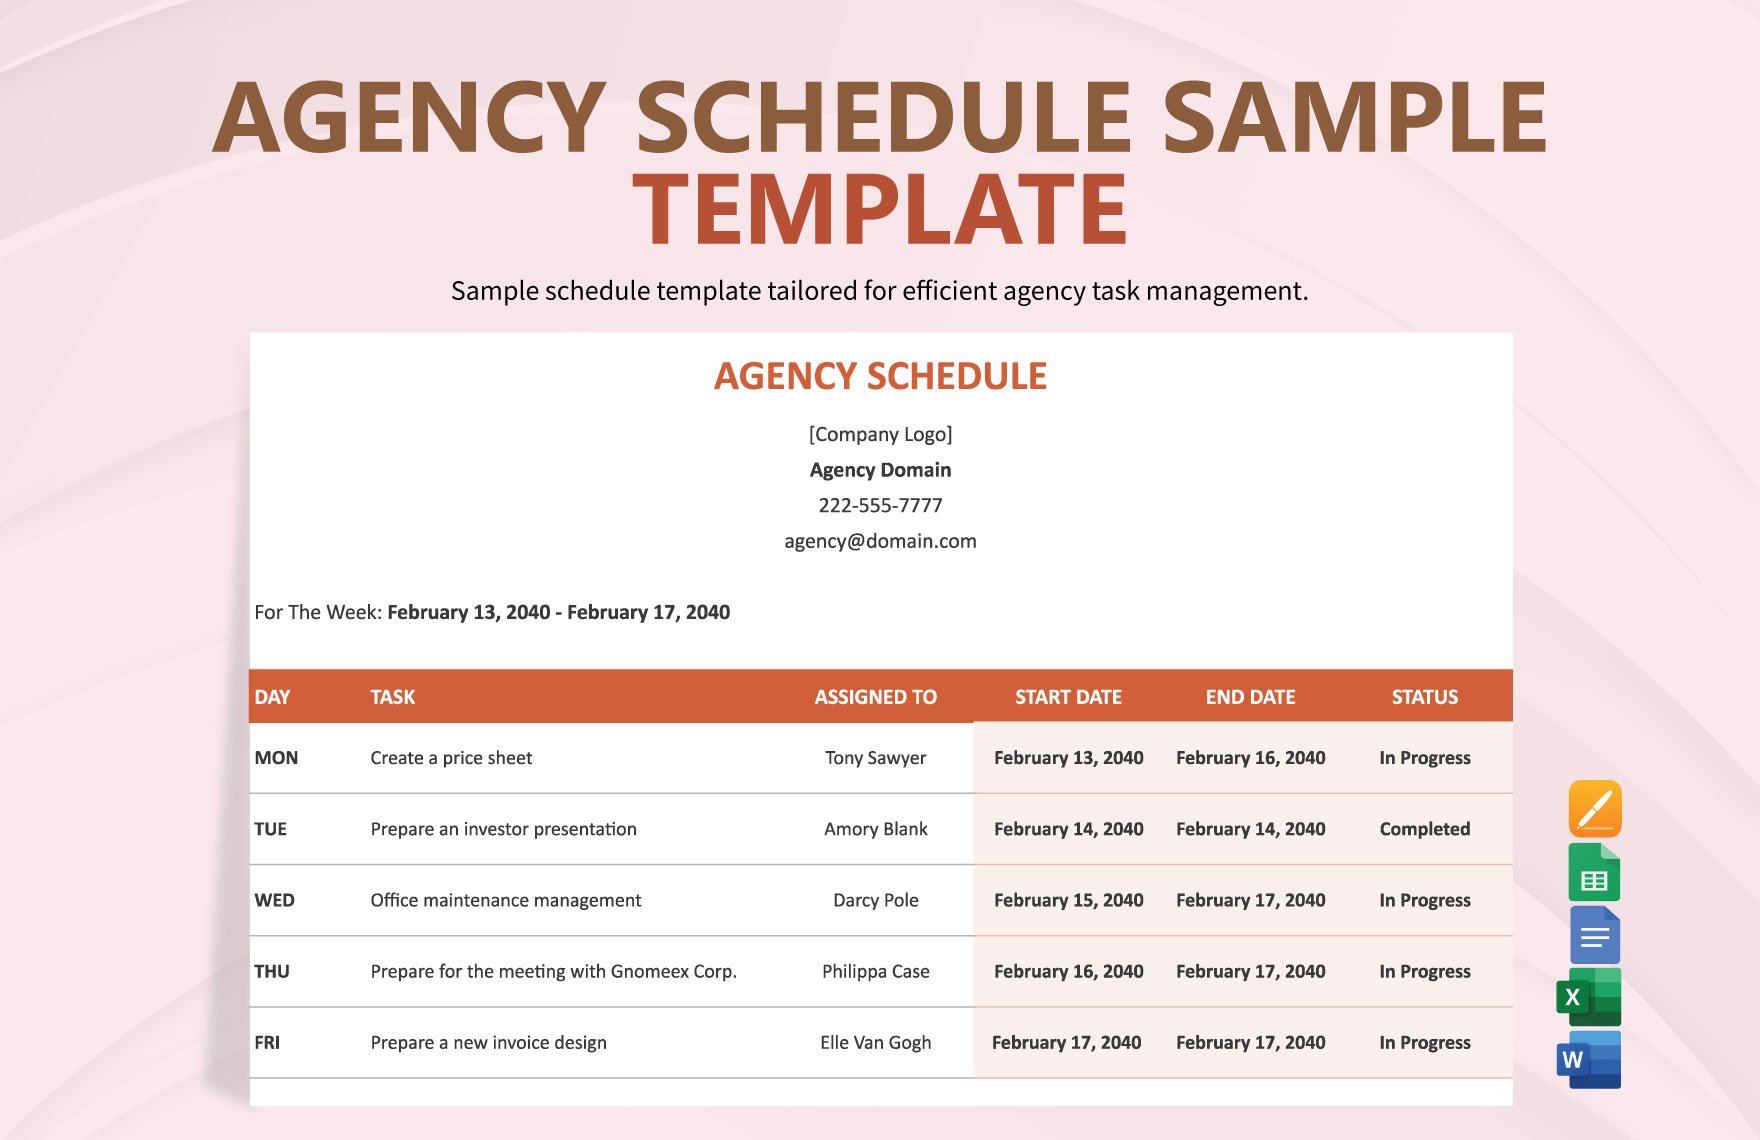 Agency Schedule Sample Template